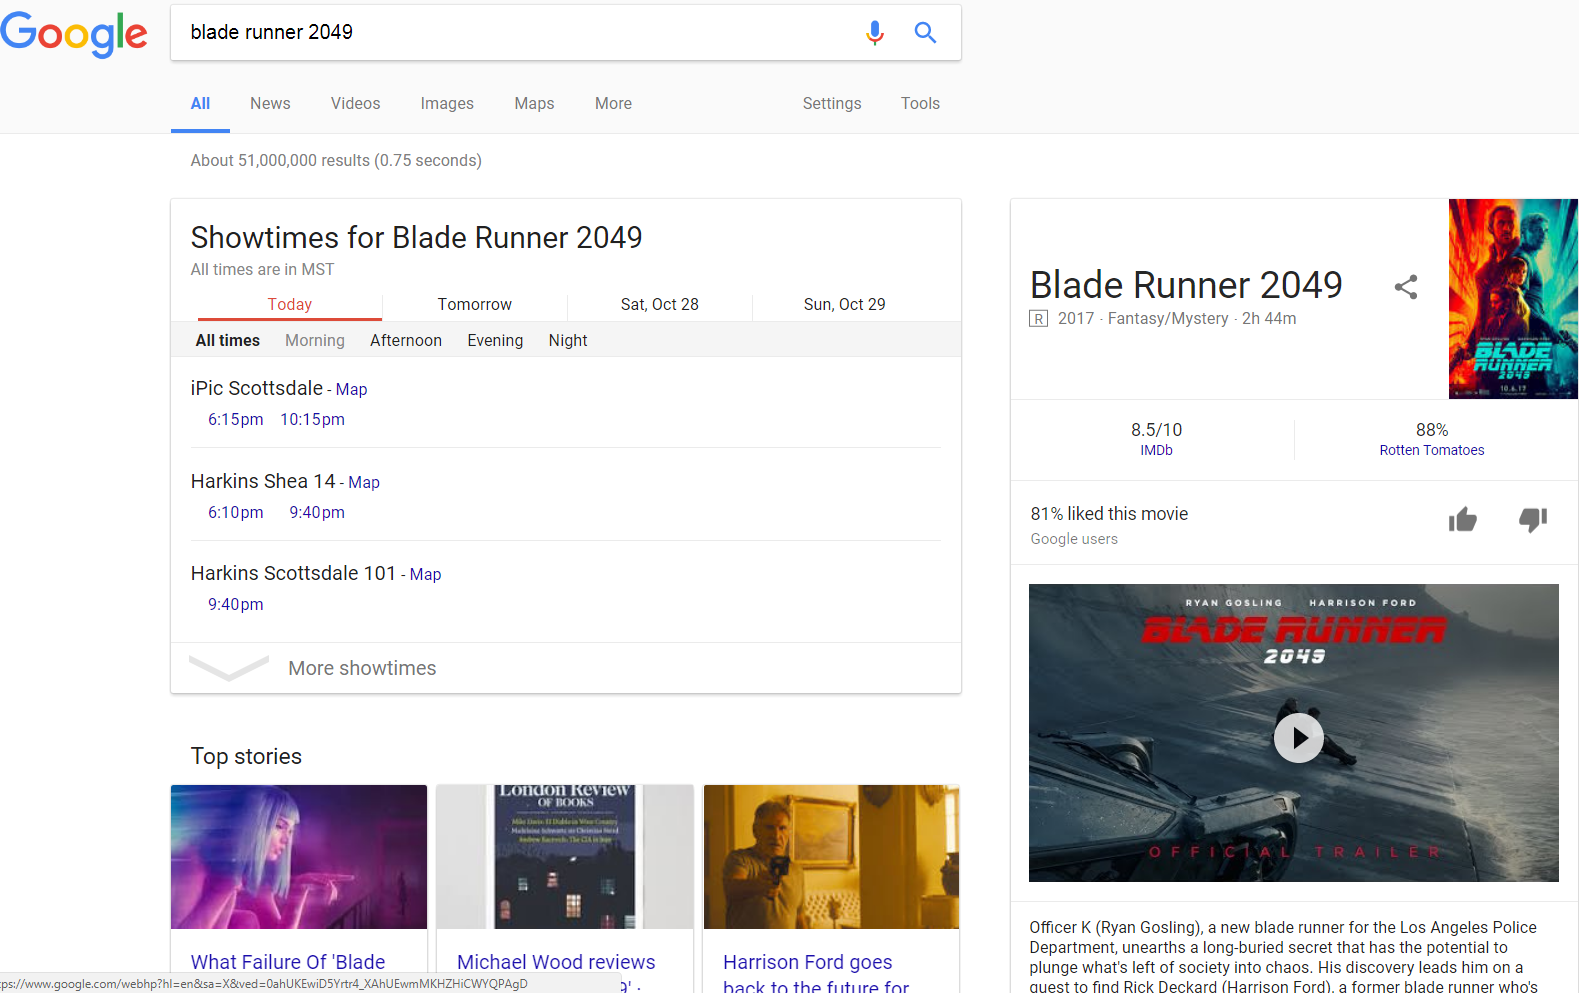 How to Get Featured Snippets